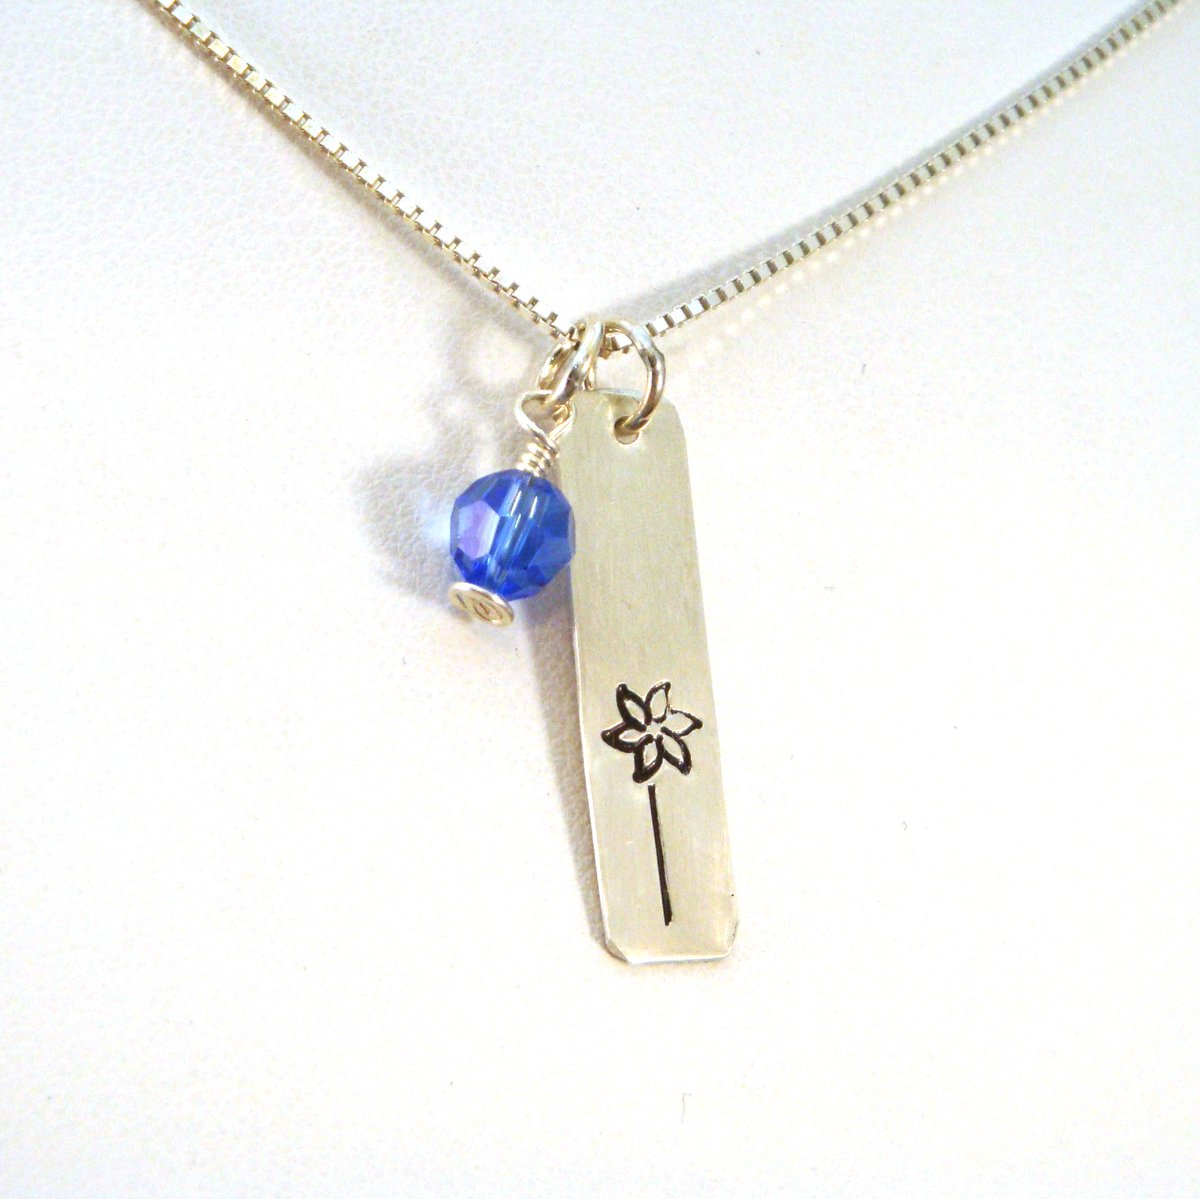 Pinwheel necklace with blue crystal for Child Abuse Awareness crowstealsfire.com/child-advocacy… #socialwork #stopchildabuse #survivorcommunity